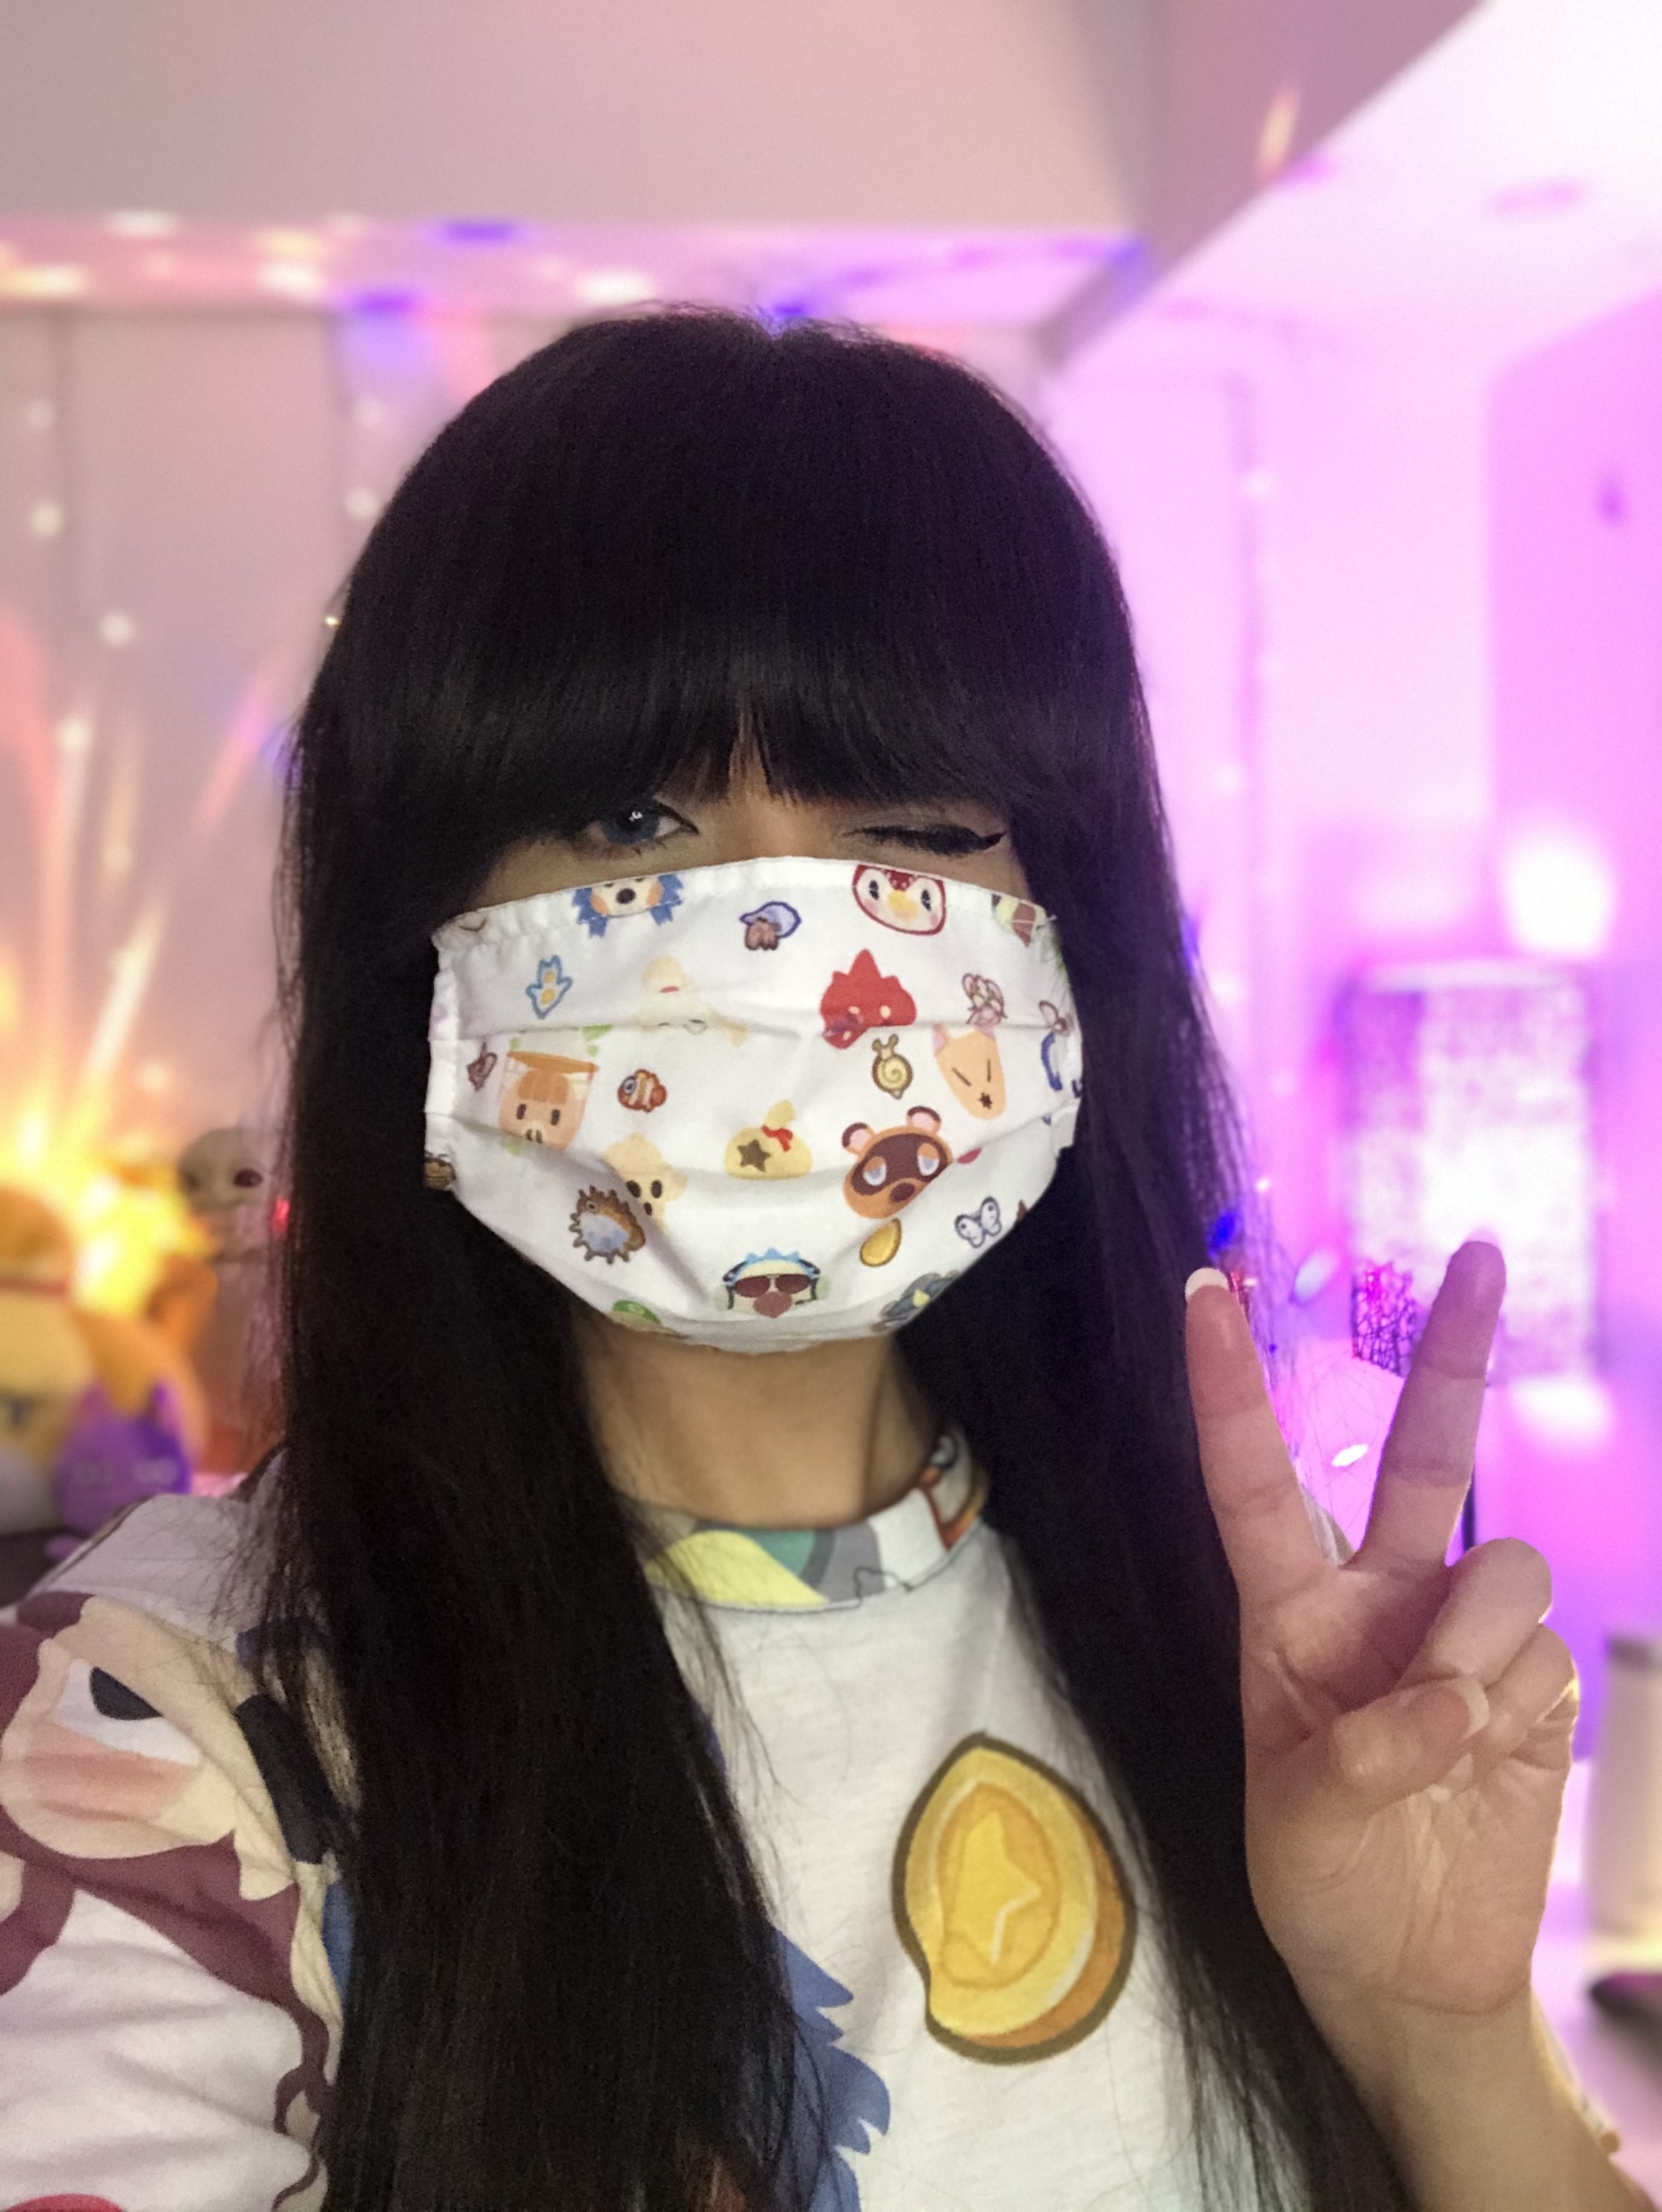 Someone wearing a face mask printed with Animal Crossing and putting up a peace sign